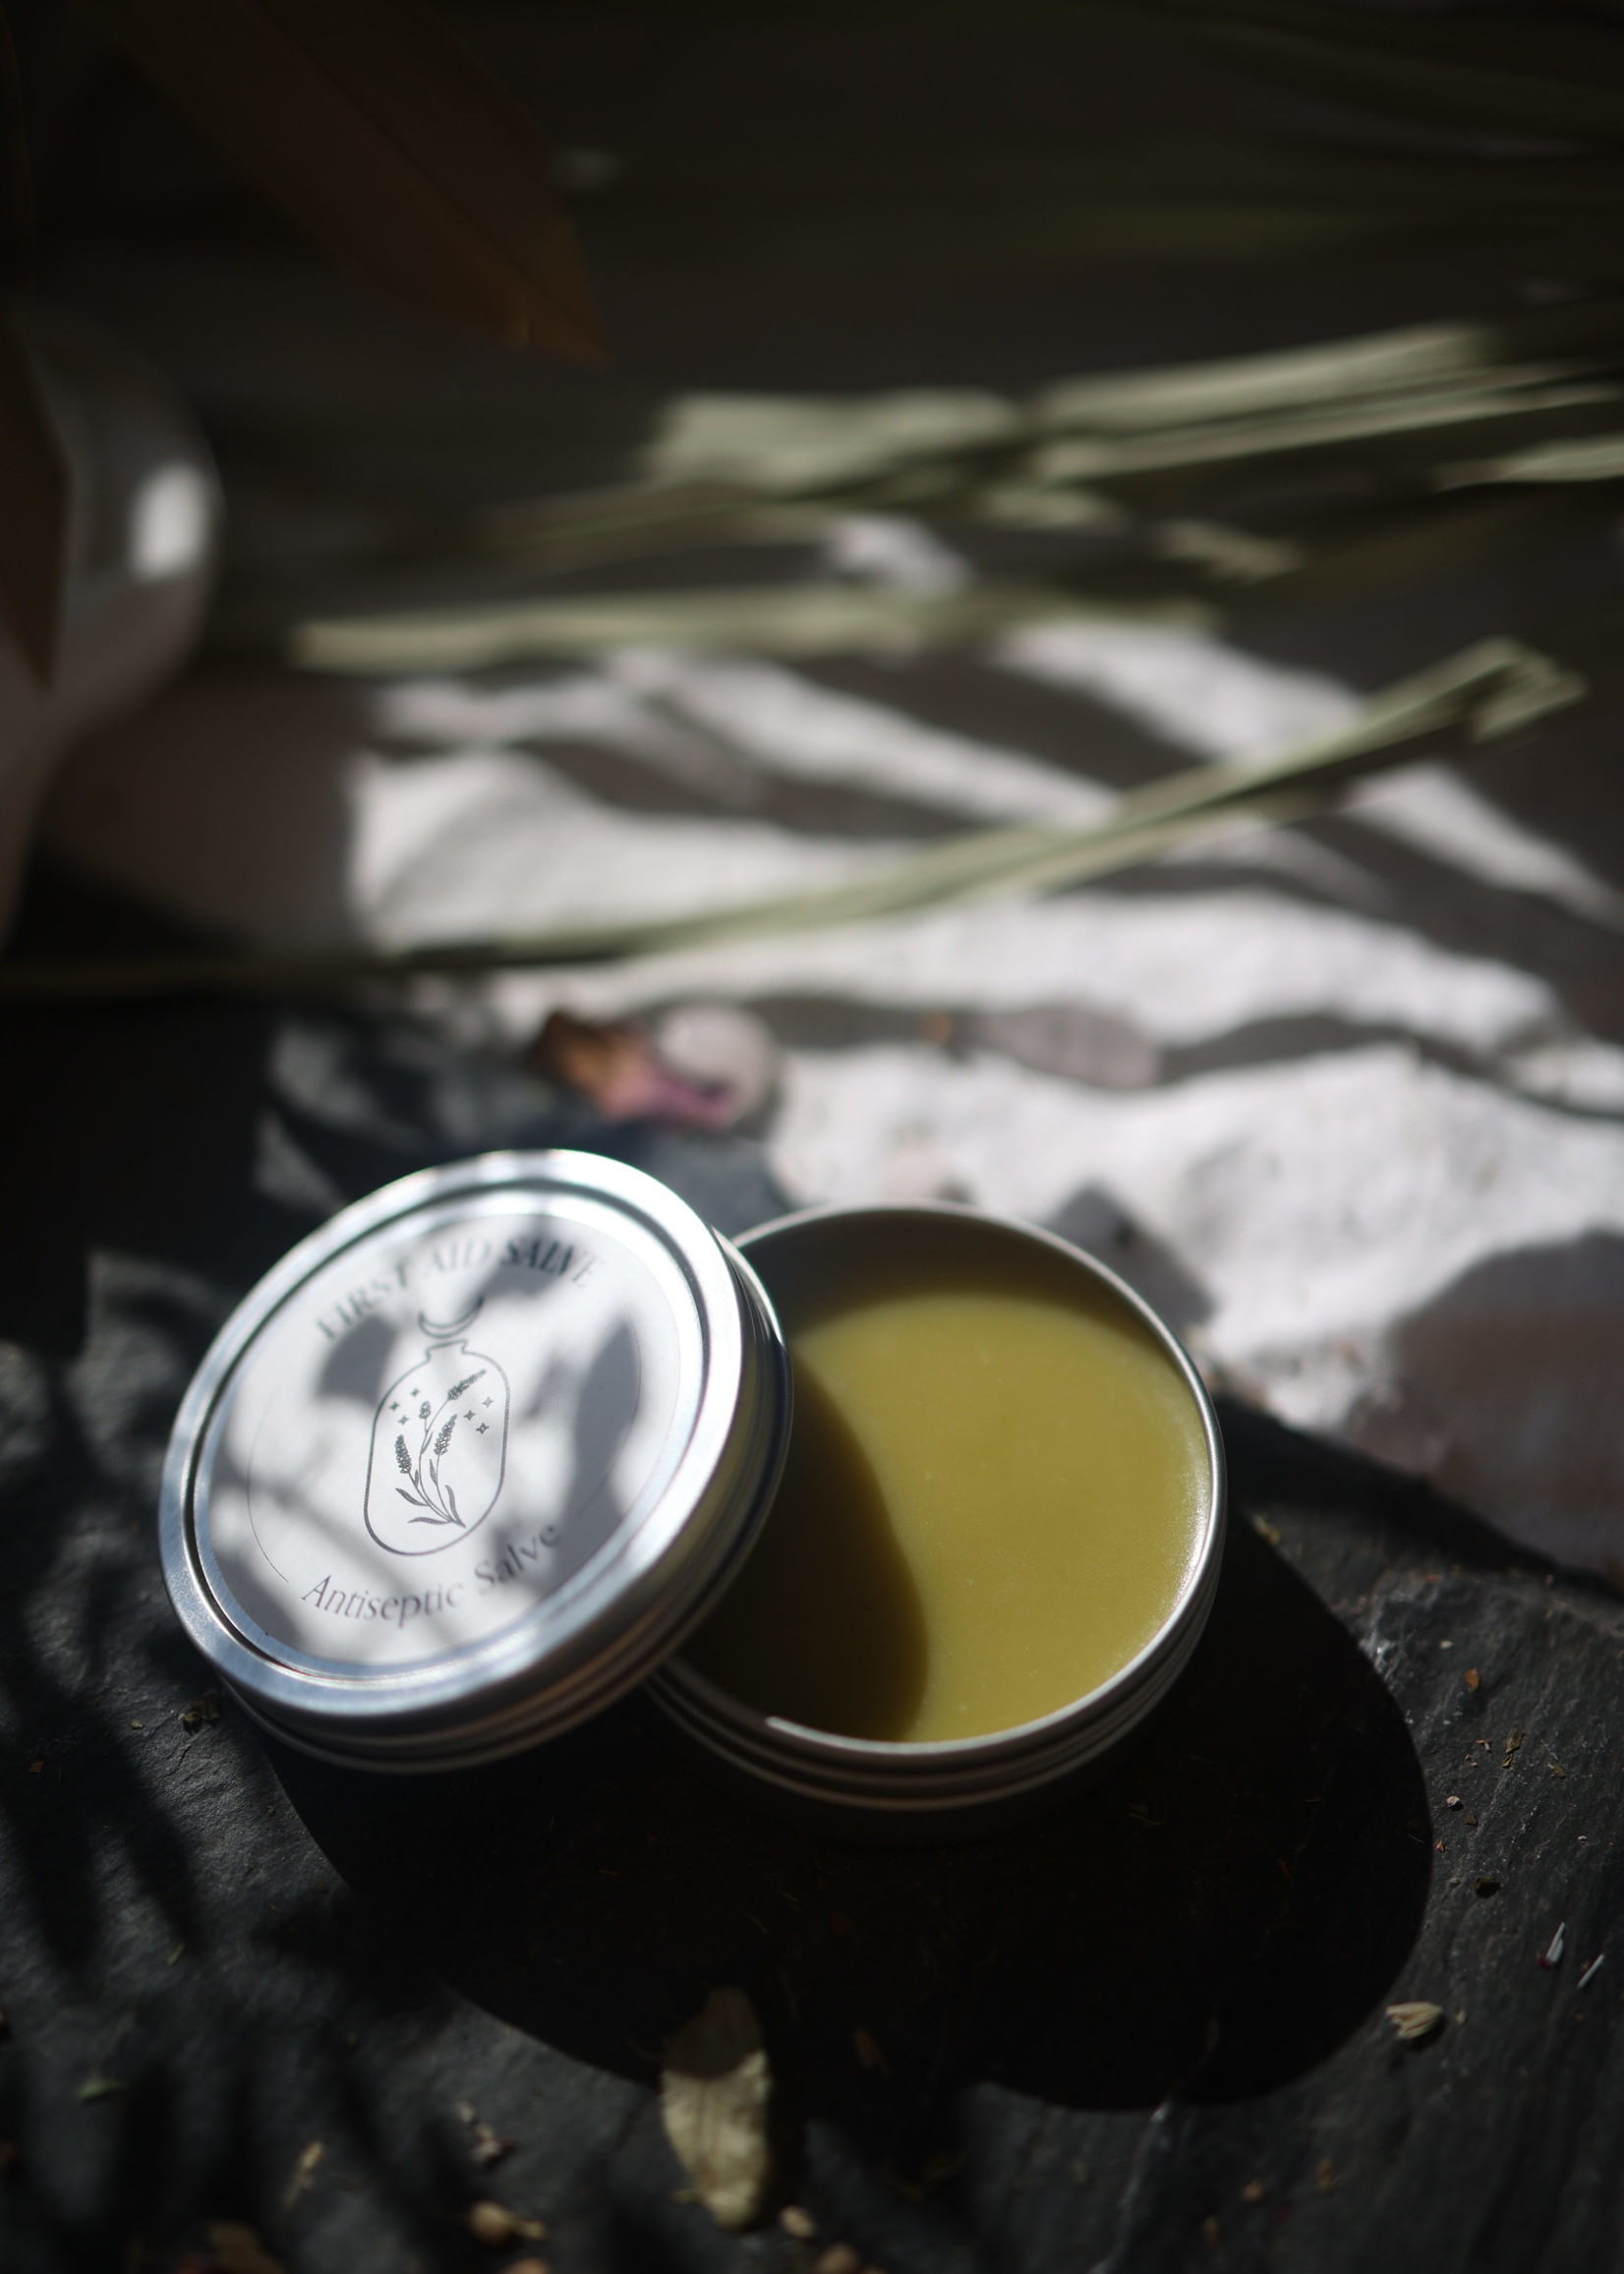 SEED APOTHECARY First Aid Salve | Antiseptic salve for protecting against infections of cuts and scrapes